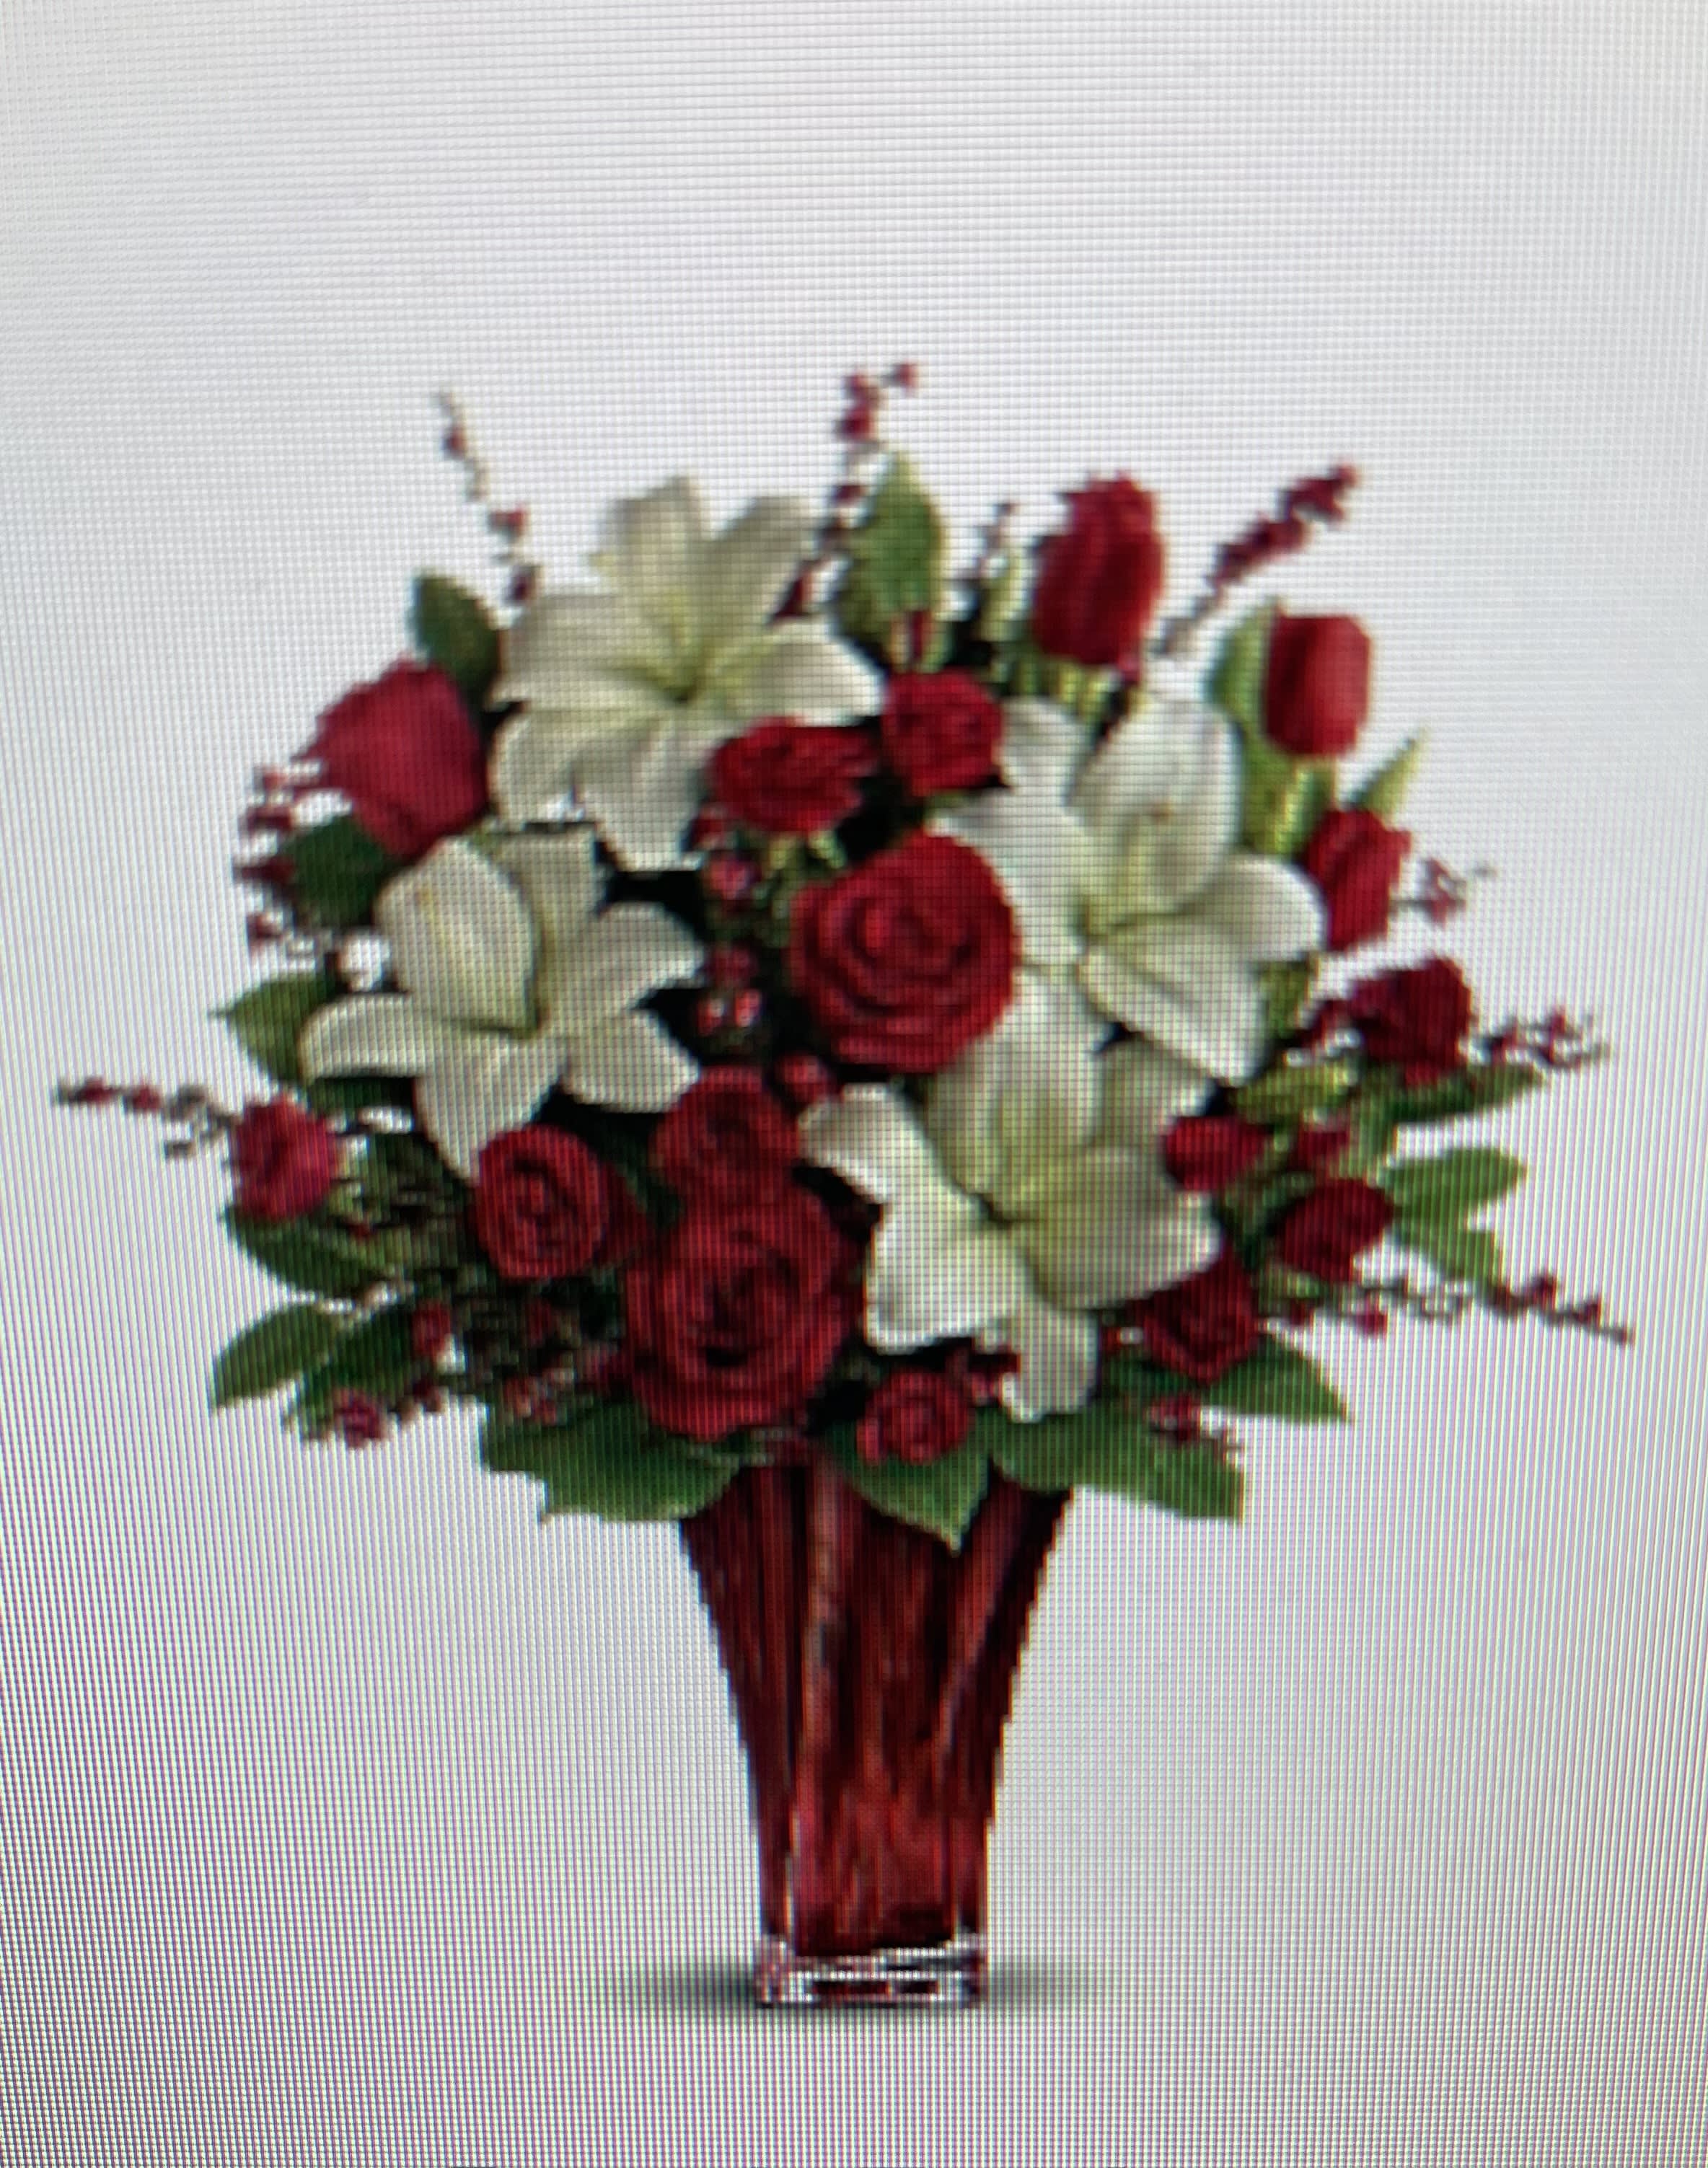 My Sweetheart - The name says it all for this beautiful bouquet